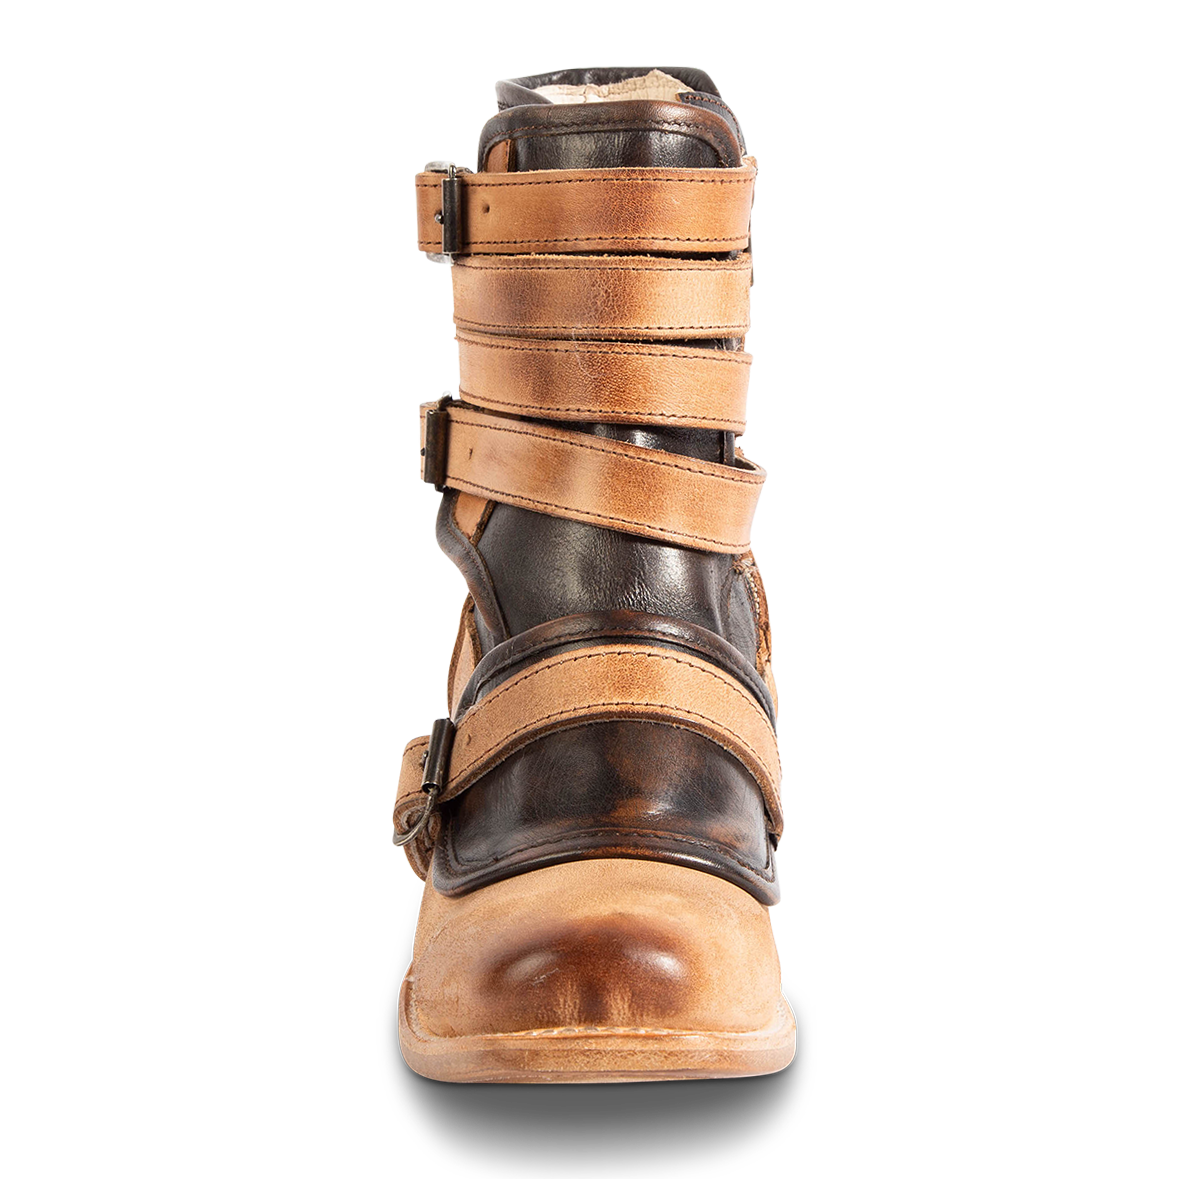 Front view showing FREEBIRD women's Darlin beige leather bootie with leather straps and square toe